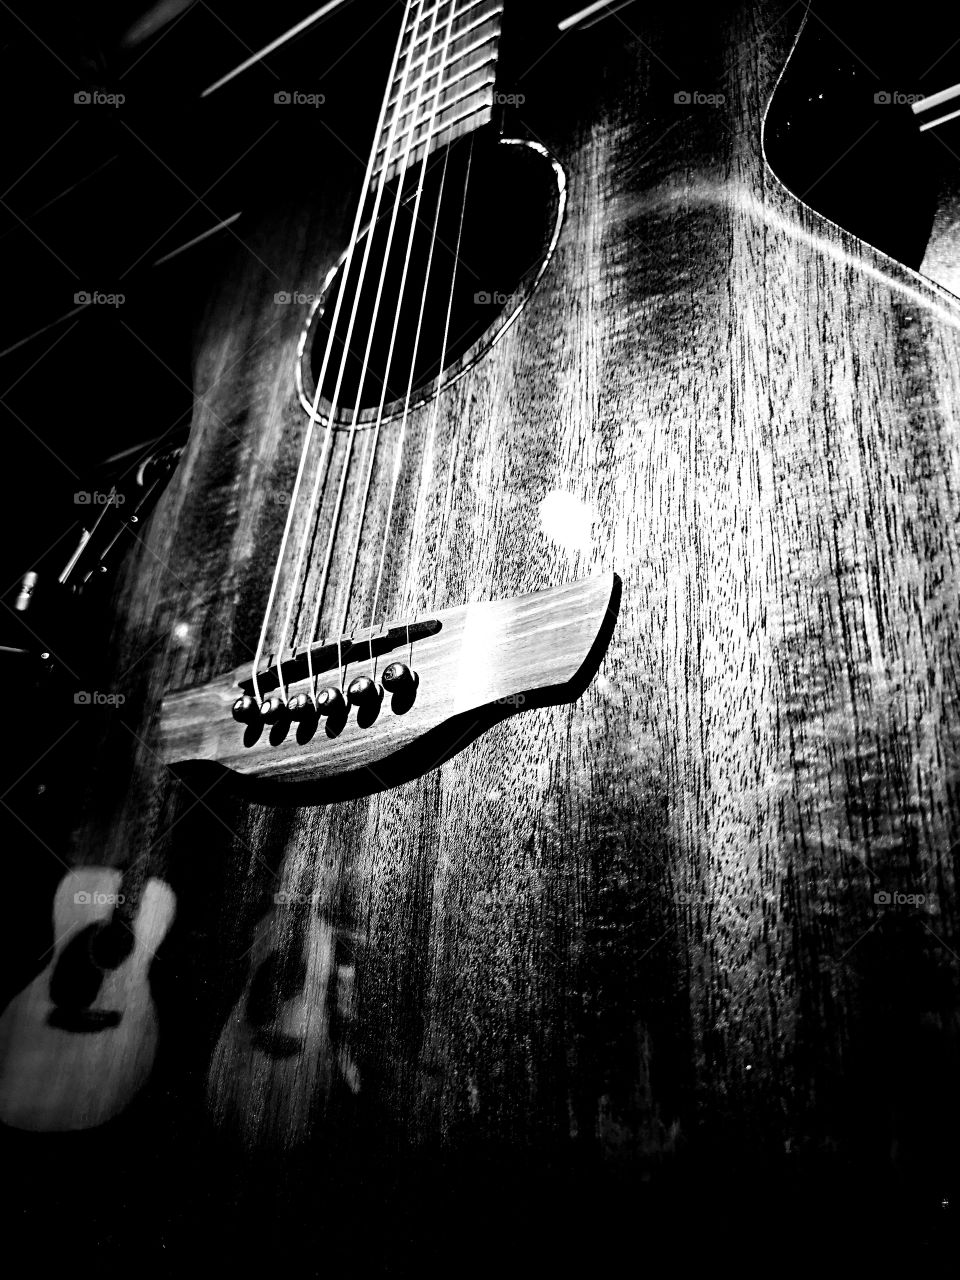 10-11-18 Acoustic Guitar black and white